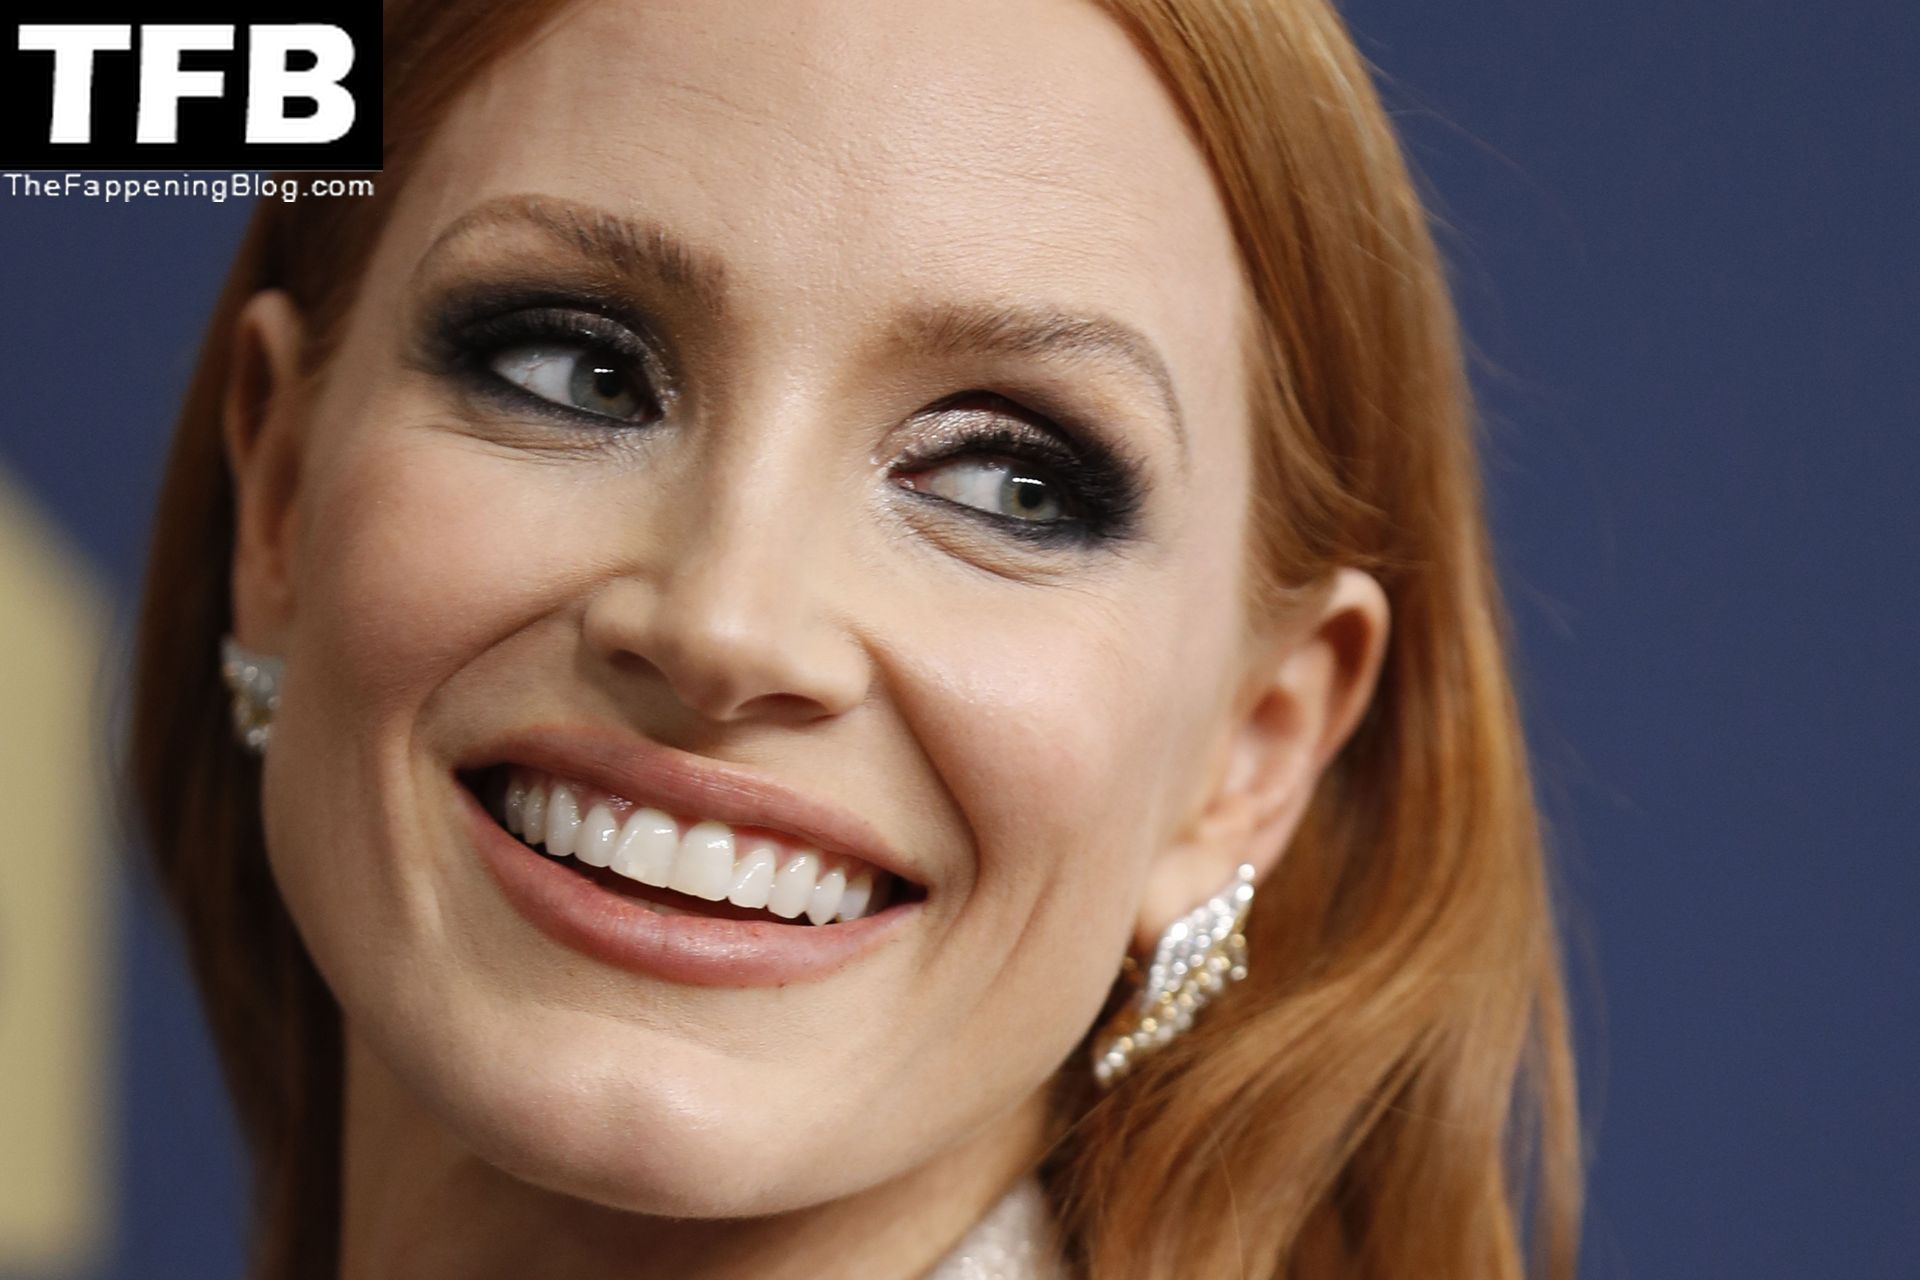 Jessica-Chastain-Sexy-The-Fappening-Blog-154.jpg